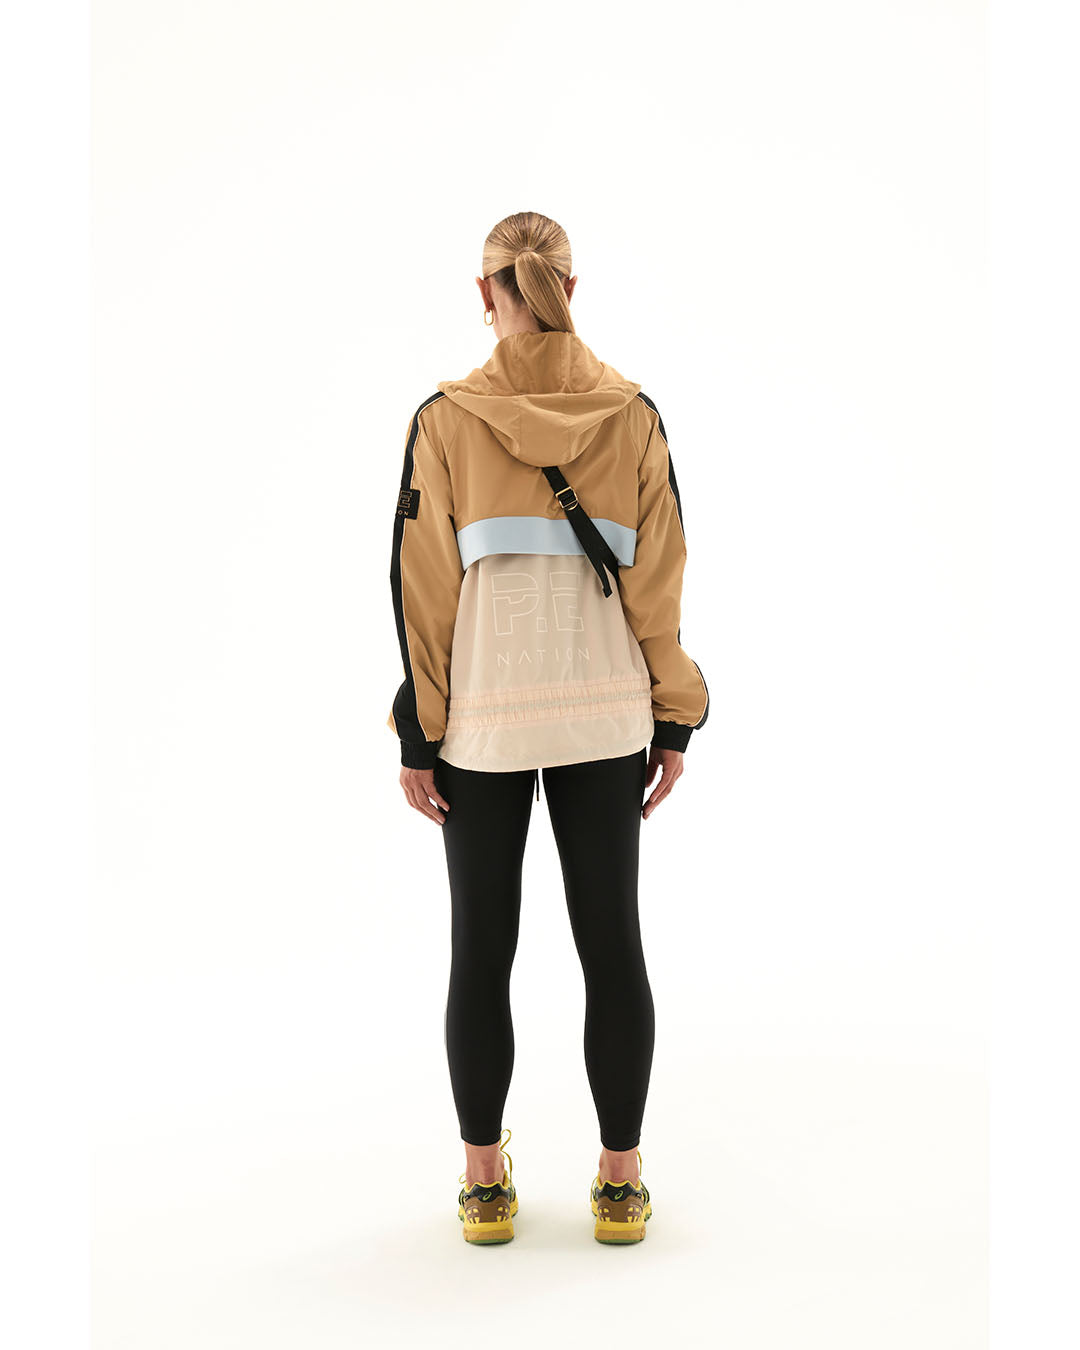 Man Down Jacket in Sand Jackets by PE Nation - Prae Store